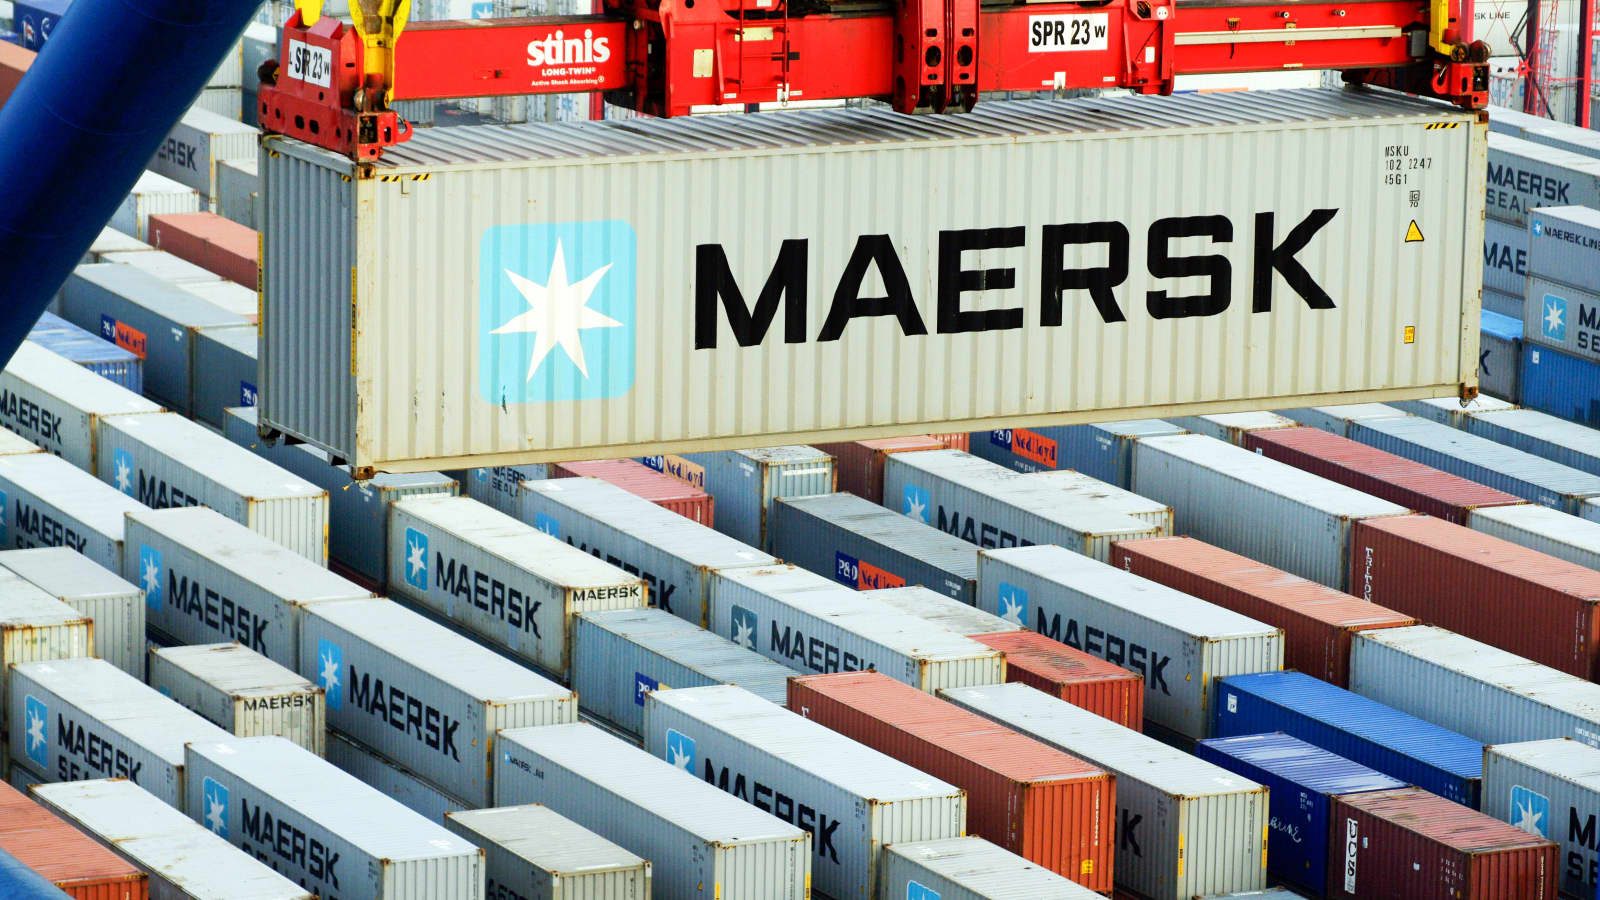 Maersk forecasts that 2021 profits could double the target